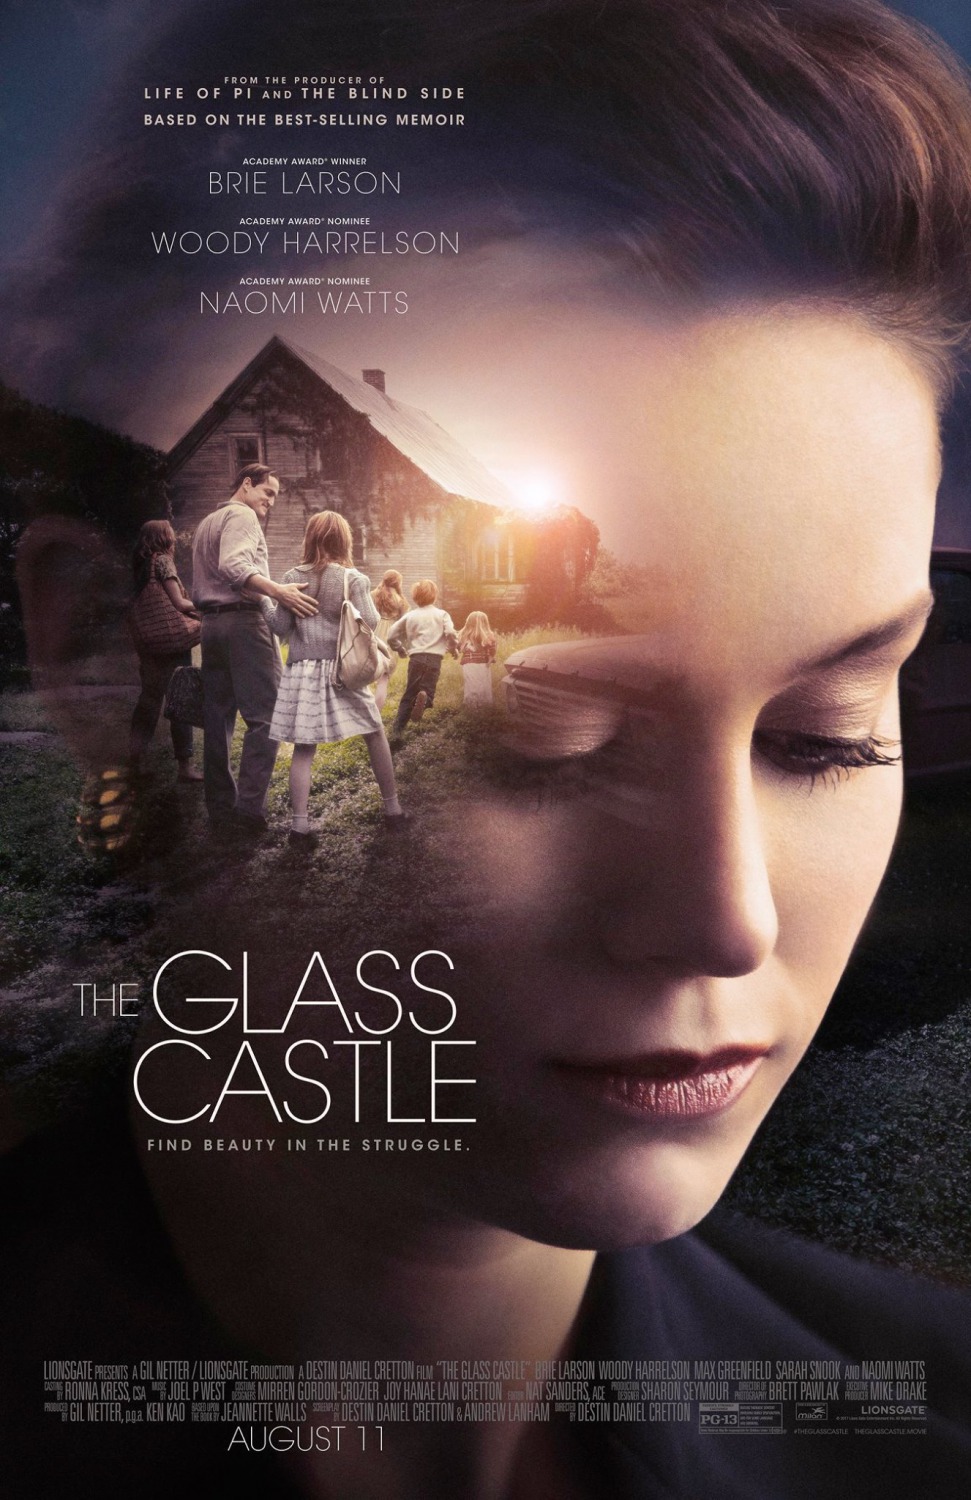 the glass castle movie review new york times